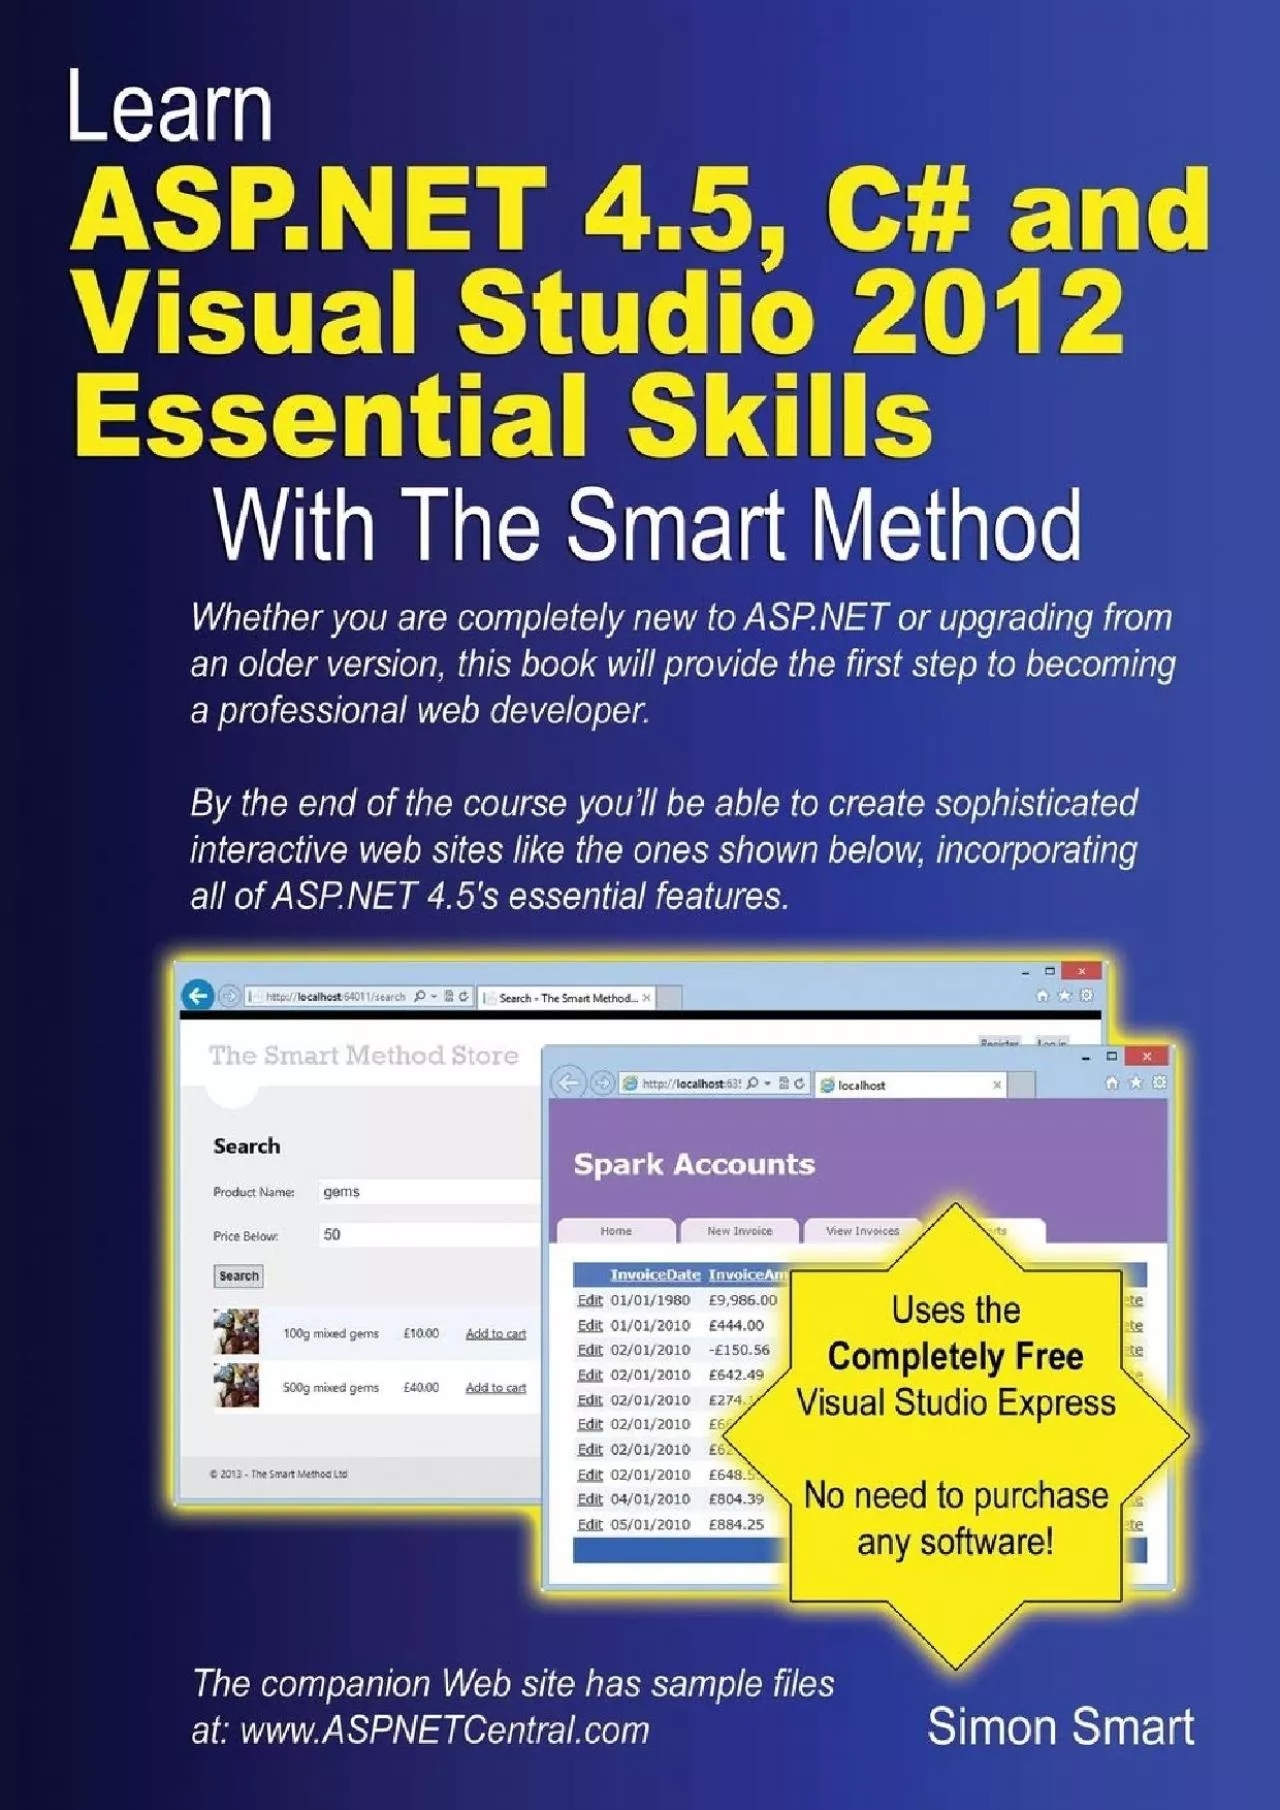 [BEST]-Learn ASP.NET 4.5, C and Visual Studio 2012 Essential Skills with The Smart Met: